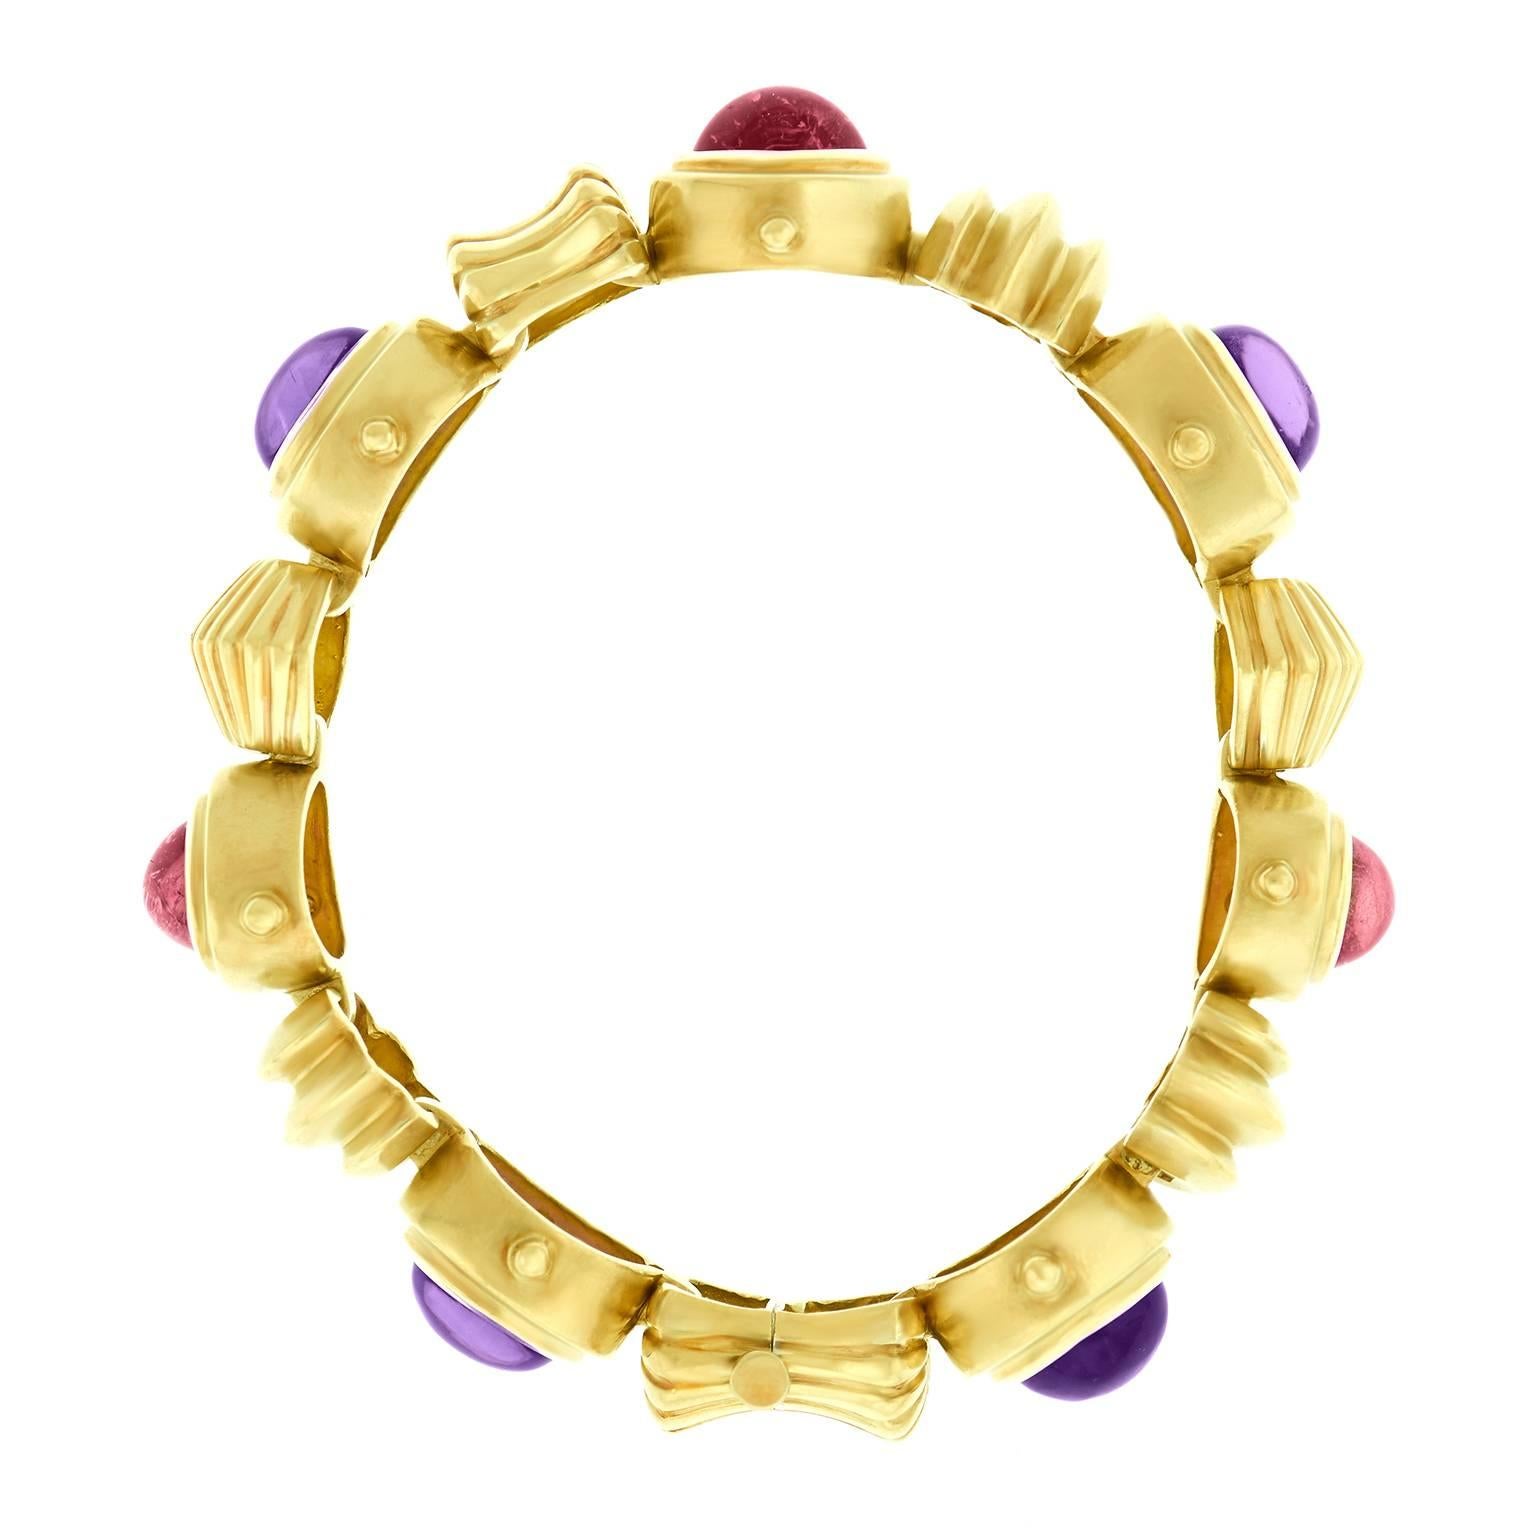 Seidengang One-of-a-Kind Tourmaline and Amethyst Gold Bracelet 3